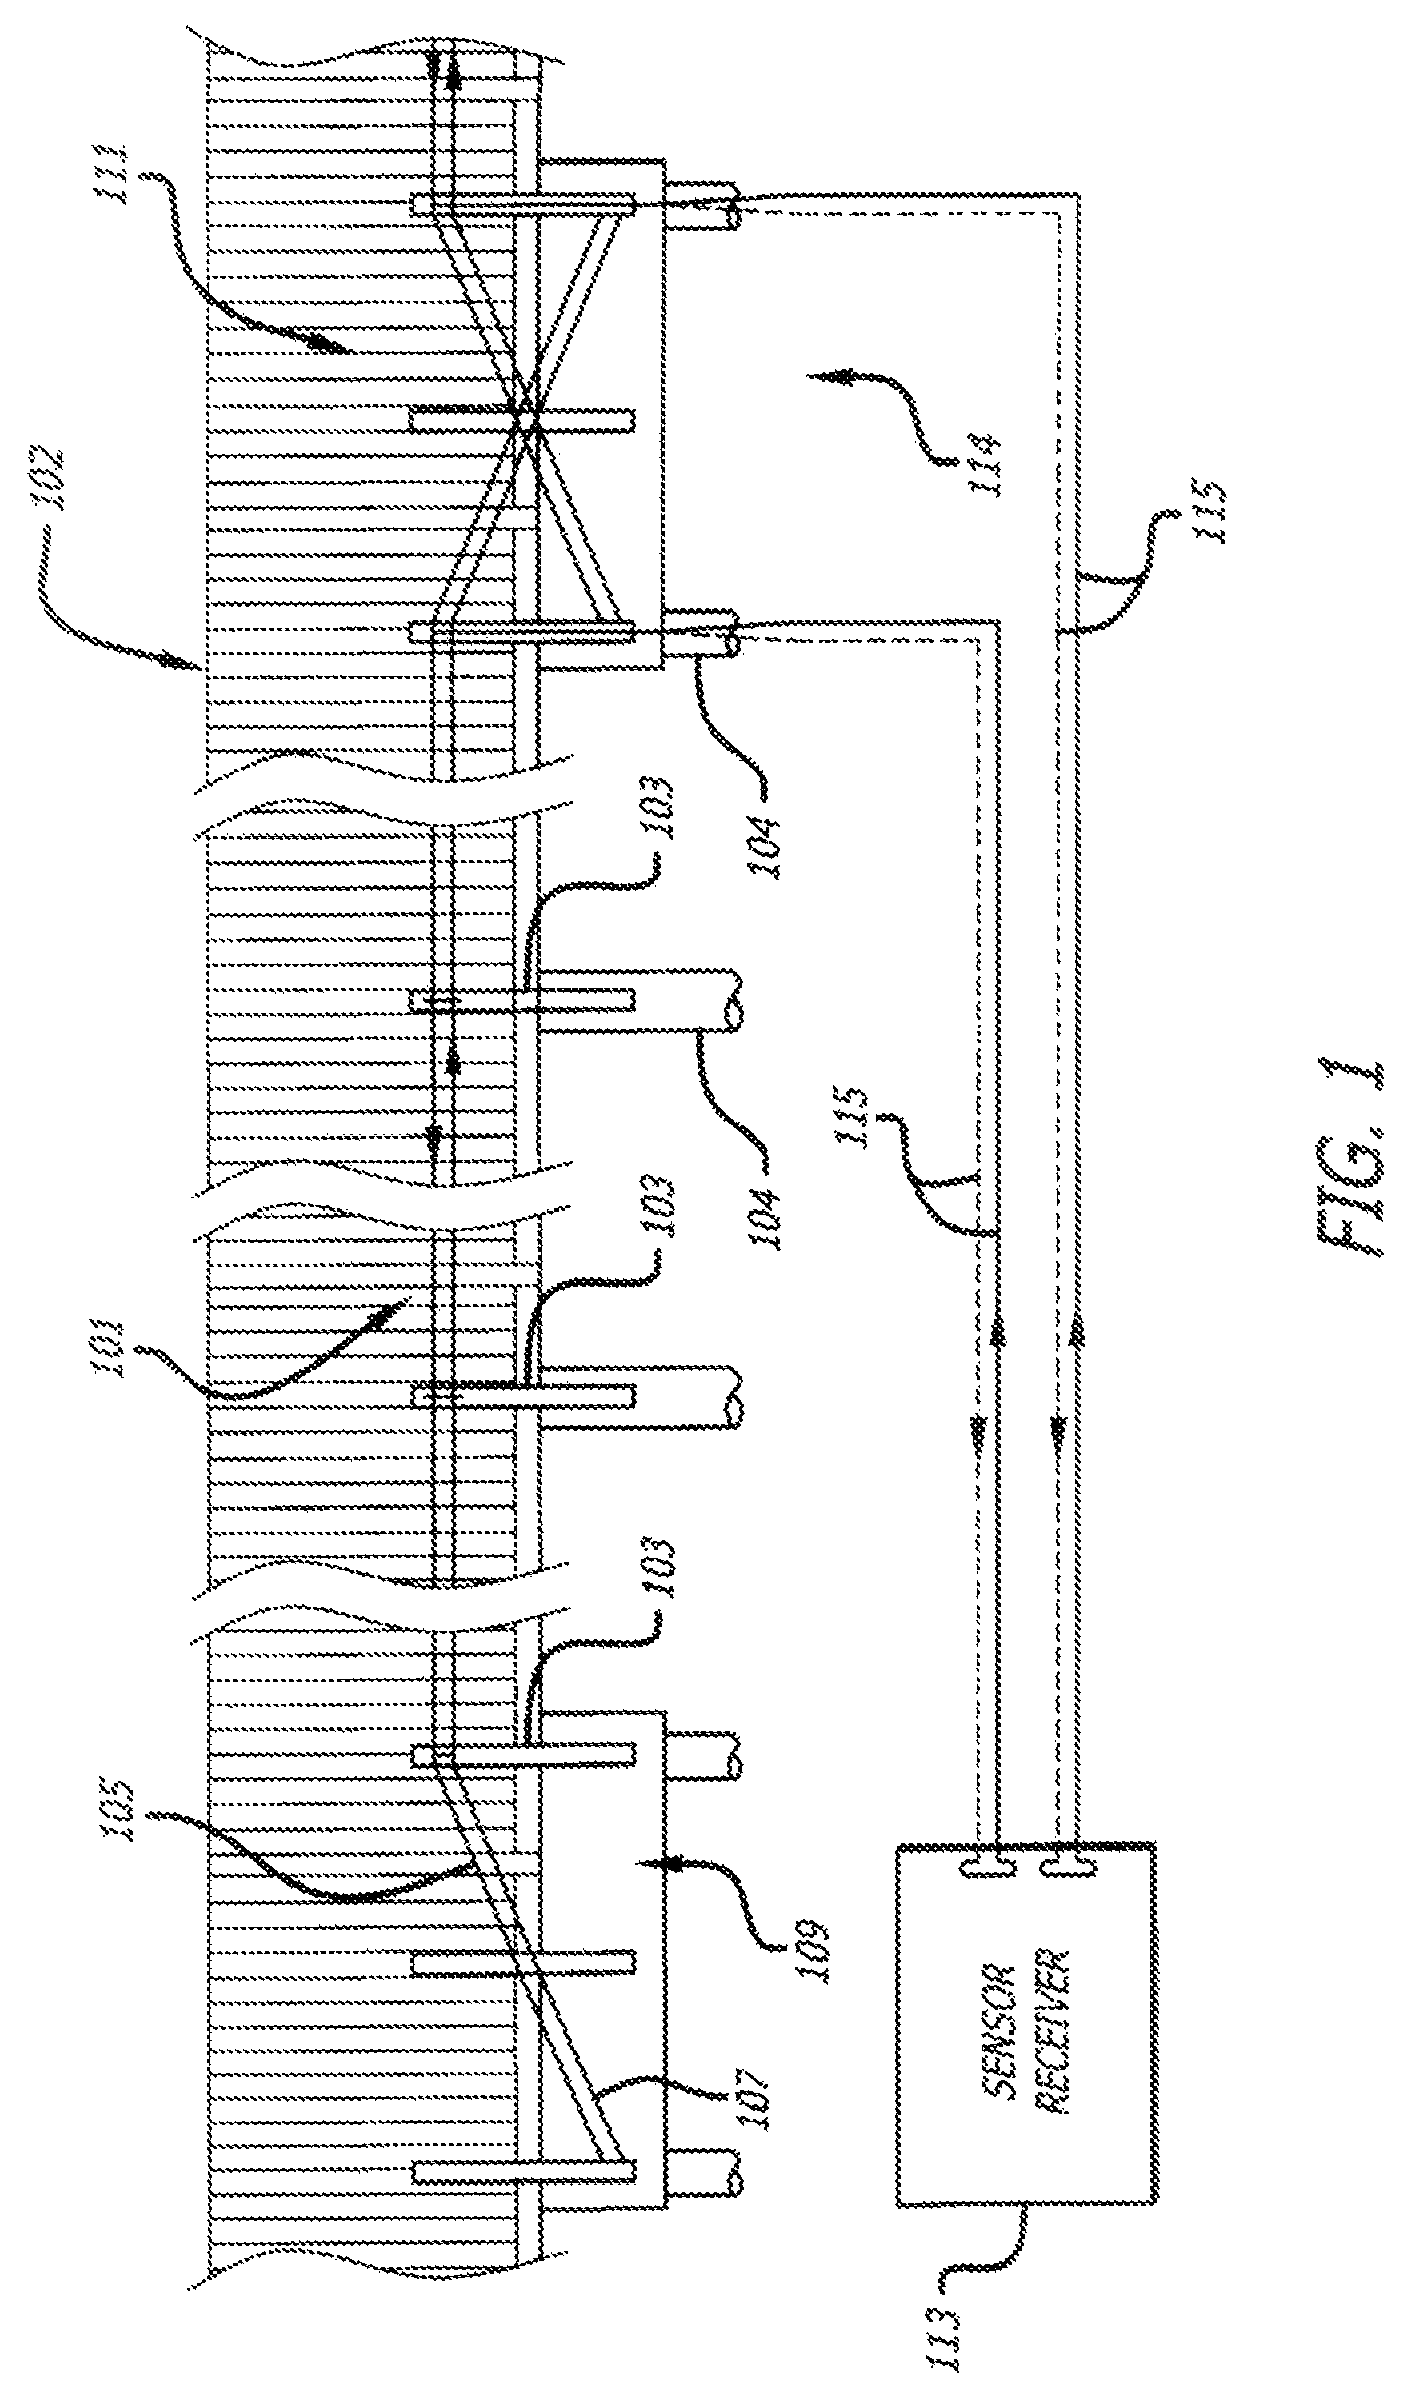 Cable crash barrier apparatus with novel cable construction and method of preventing intrusion